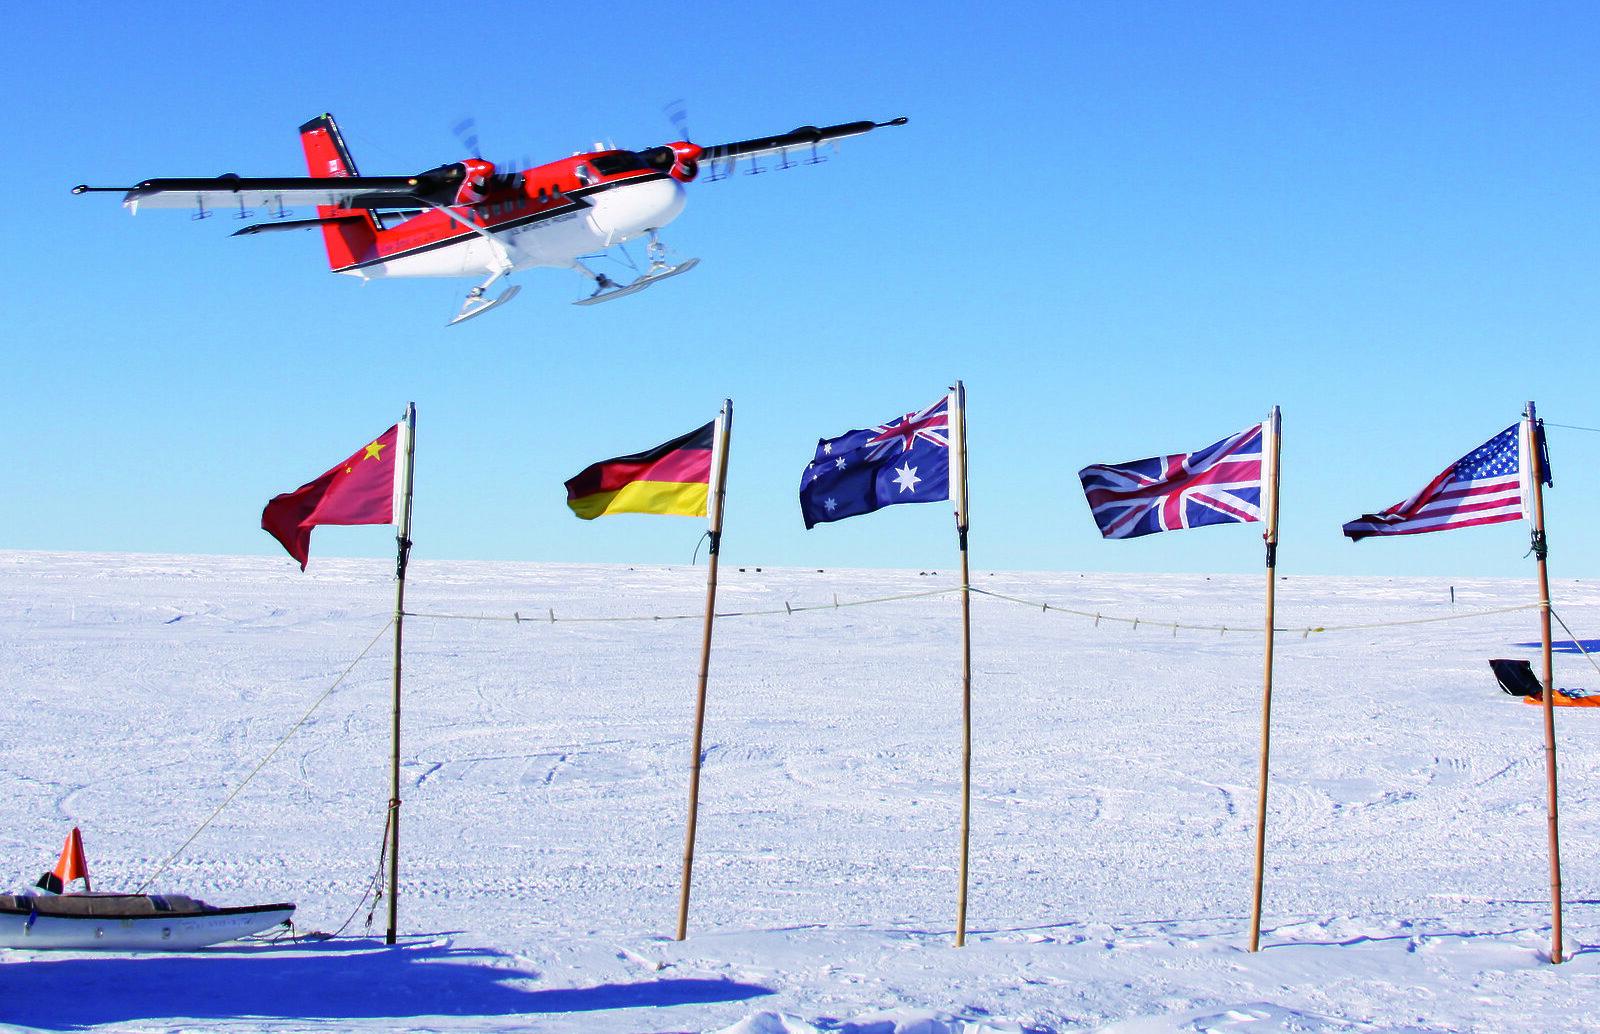 The Antarctic Treaty is turning 60 years old. In a changed world, is it still fit for purpose?